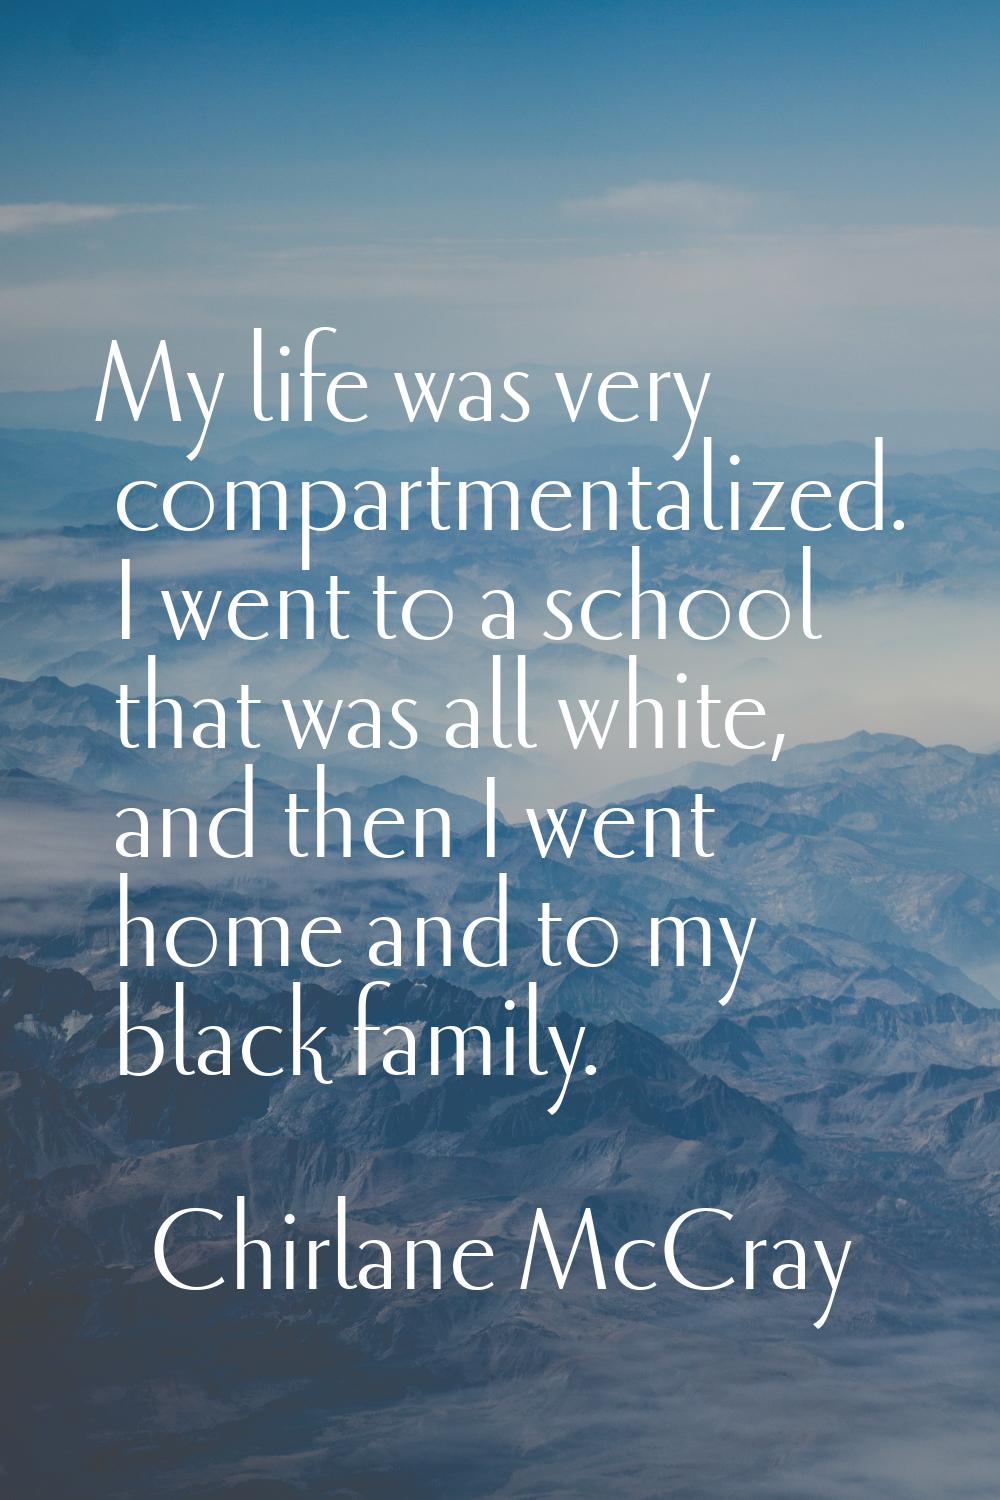 My life was very compartmentalized. I went to a school that was all white, and then I went home and